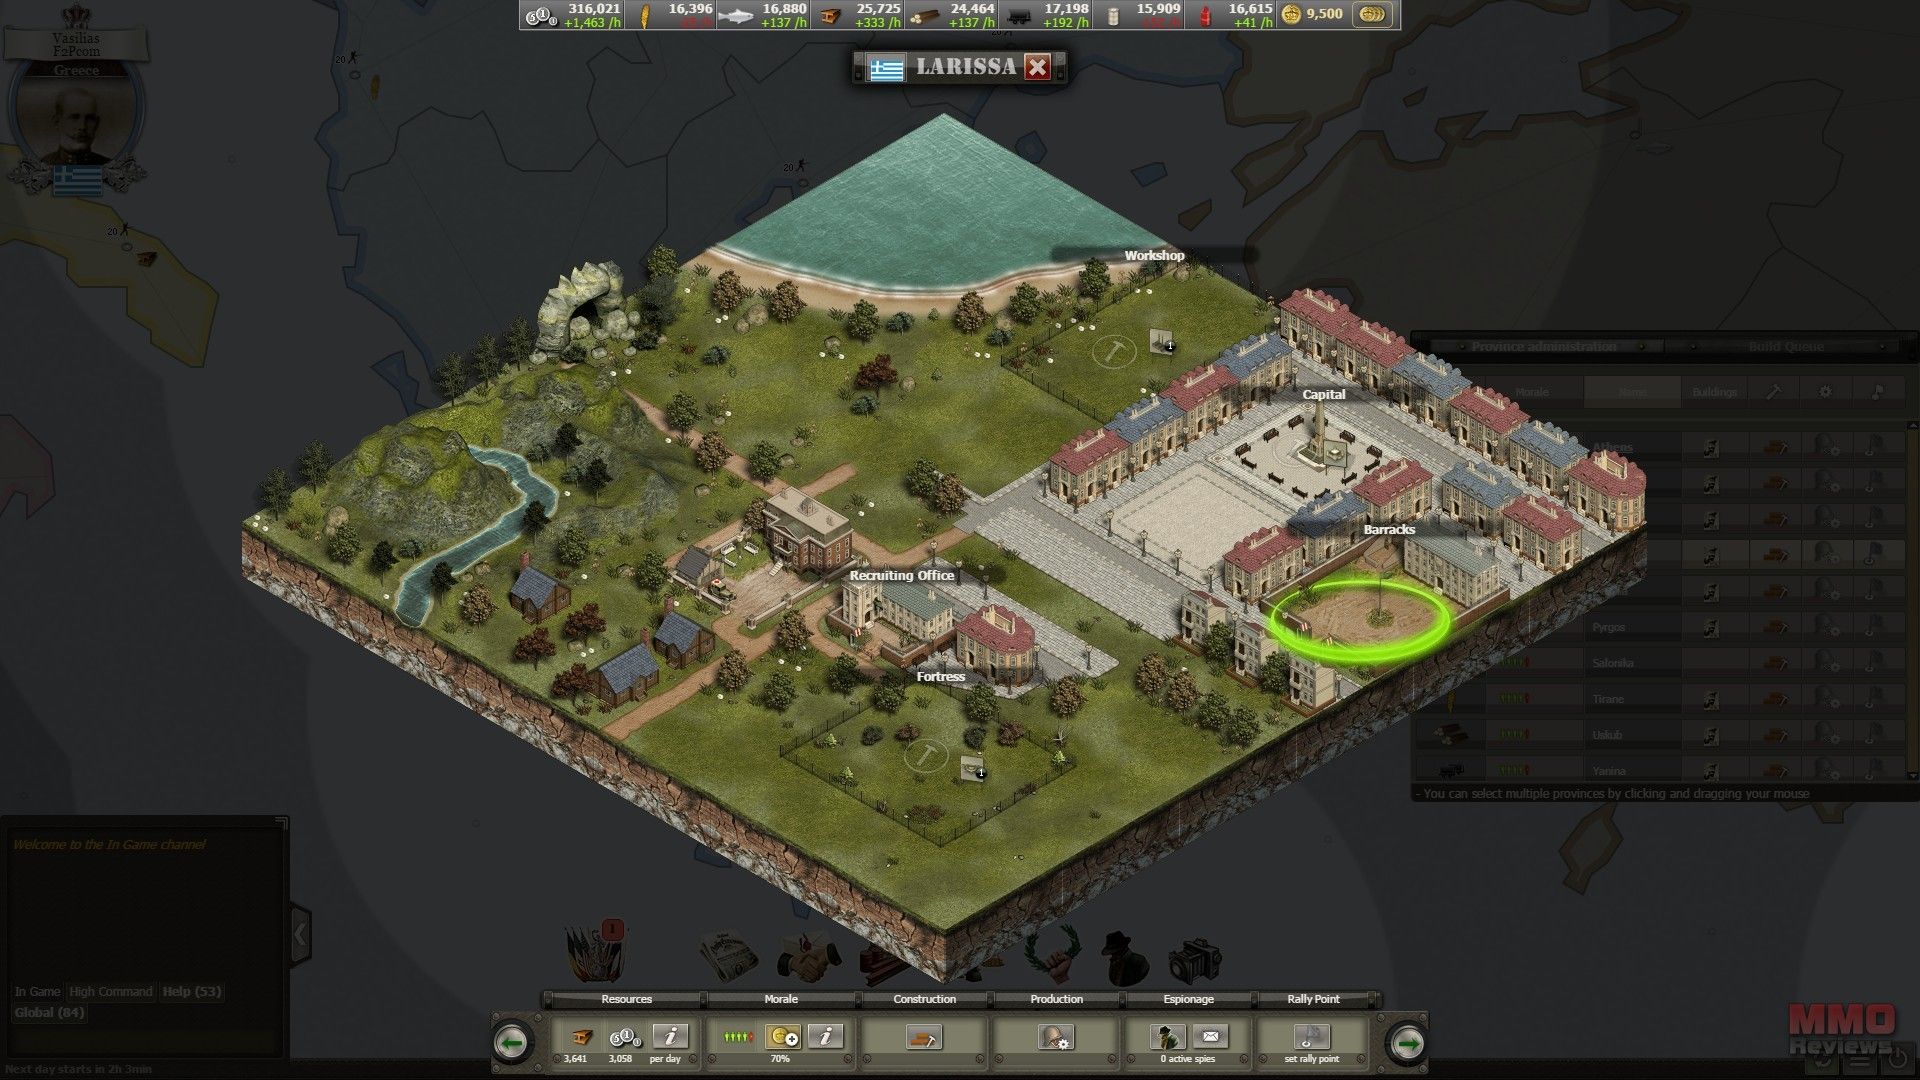 Supremacy 1914 for ios instal free